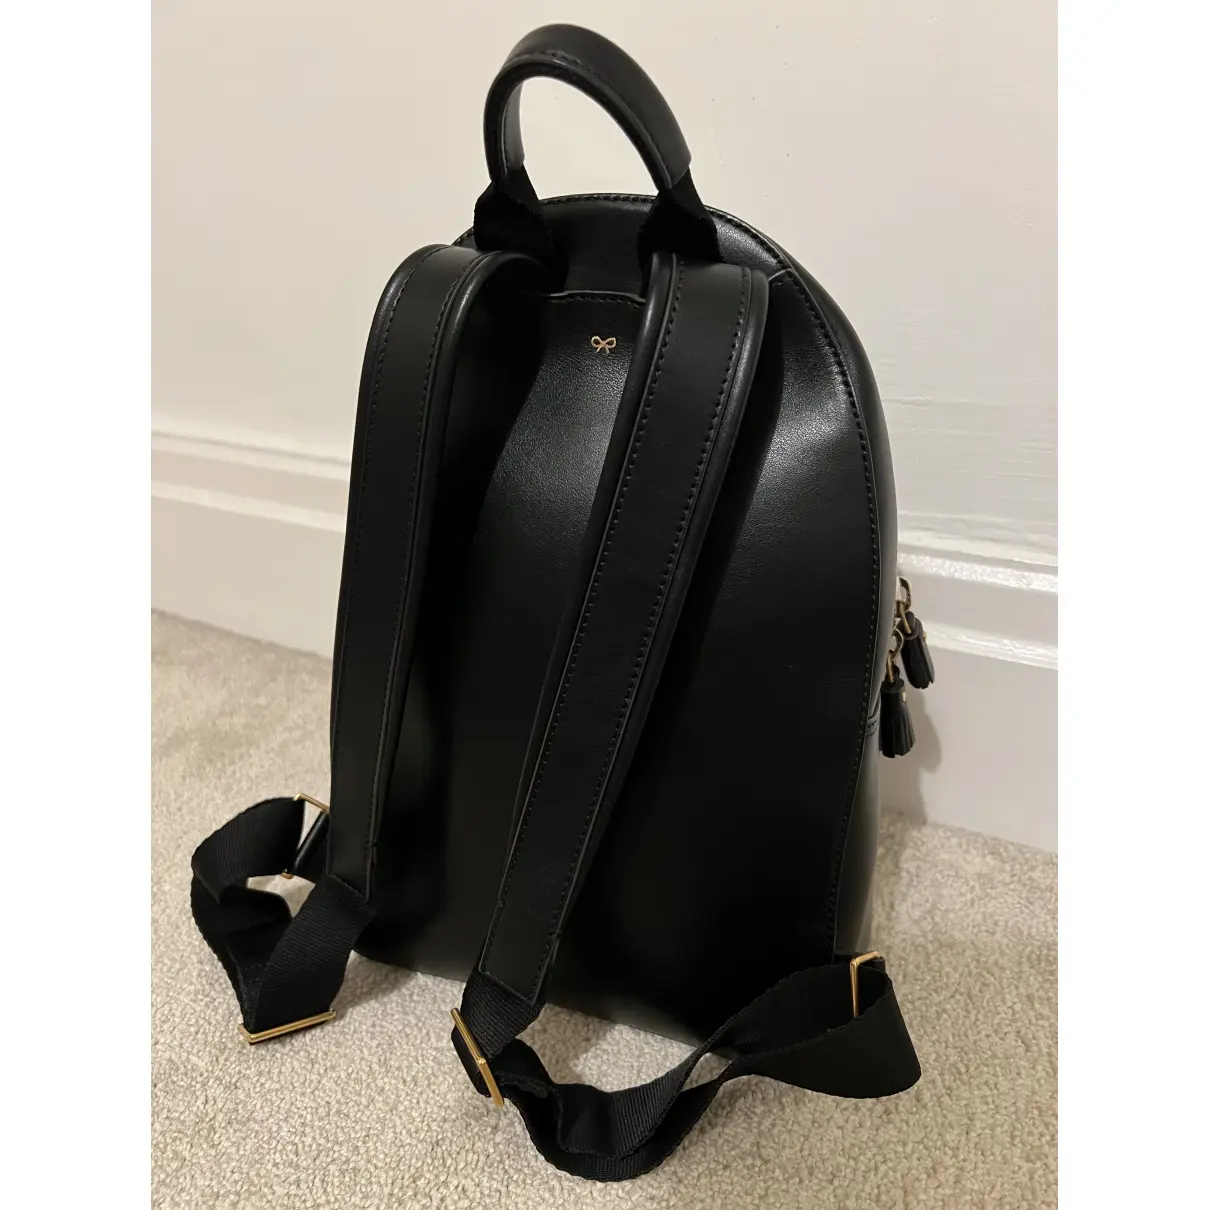 Leather backpack Anya Hindmarch